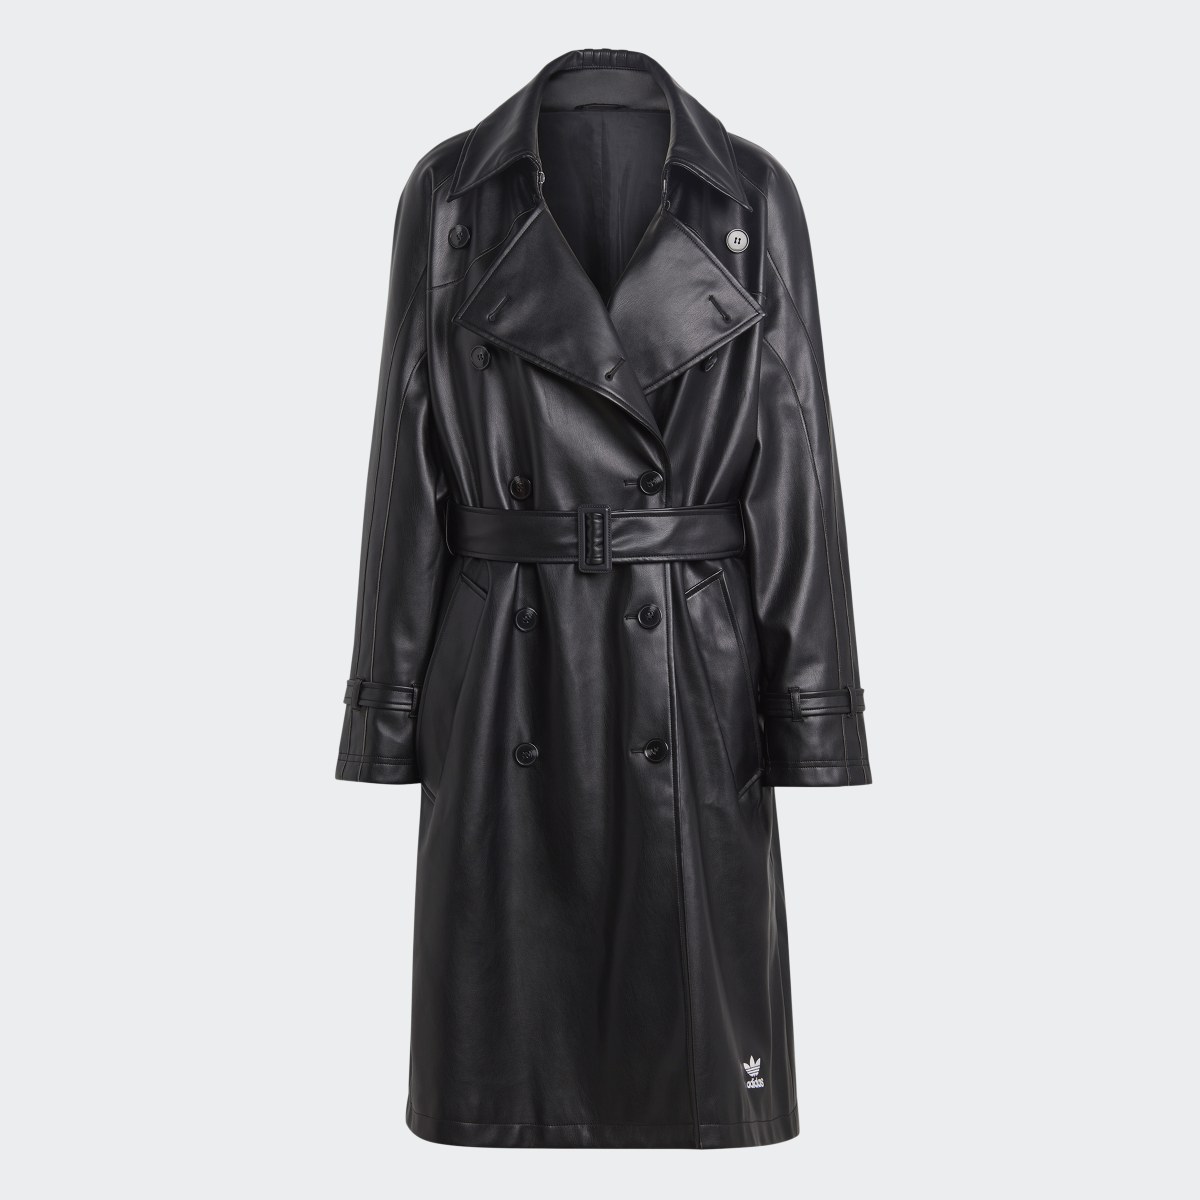 Adidas Centre Stage Faux Leather Trench Coat. 5